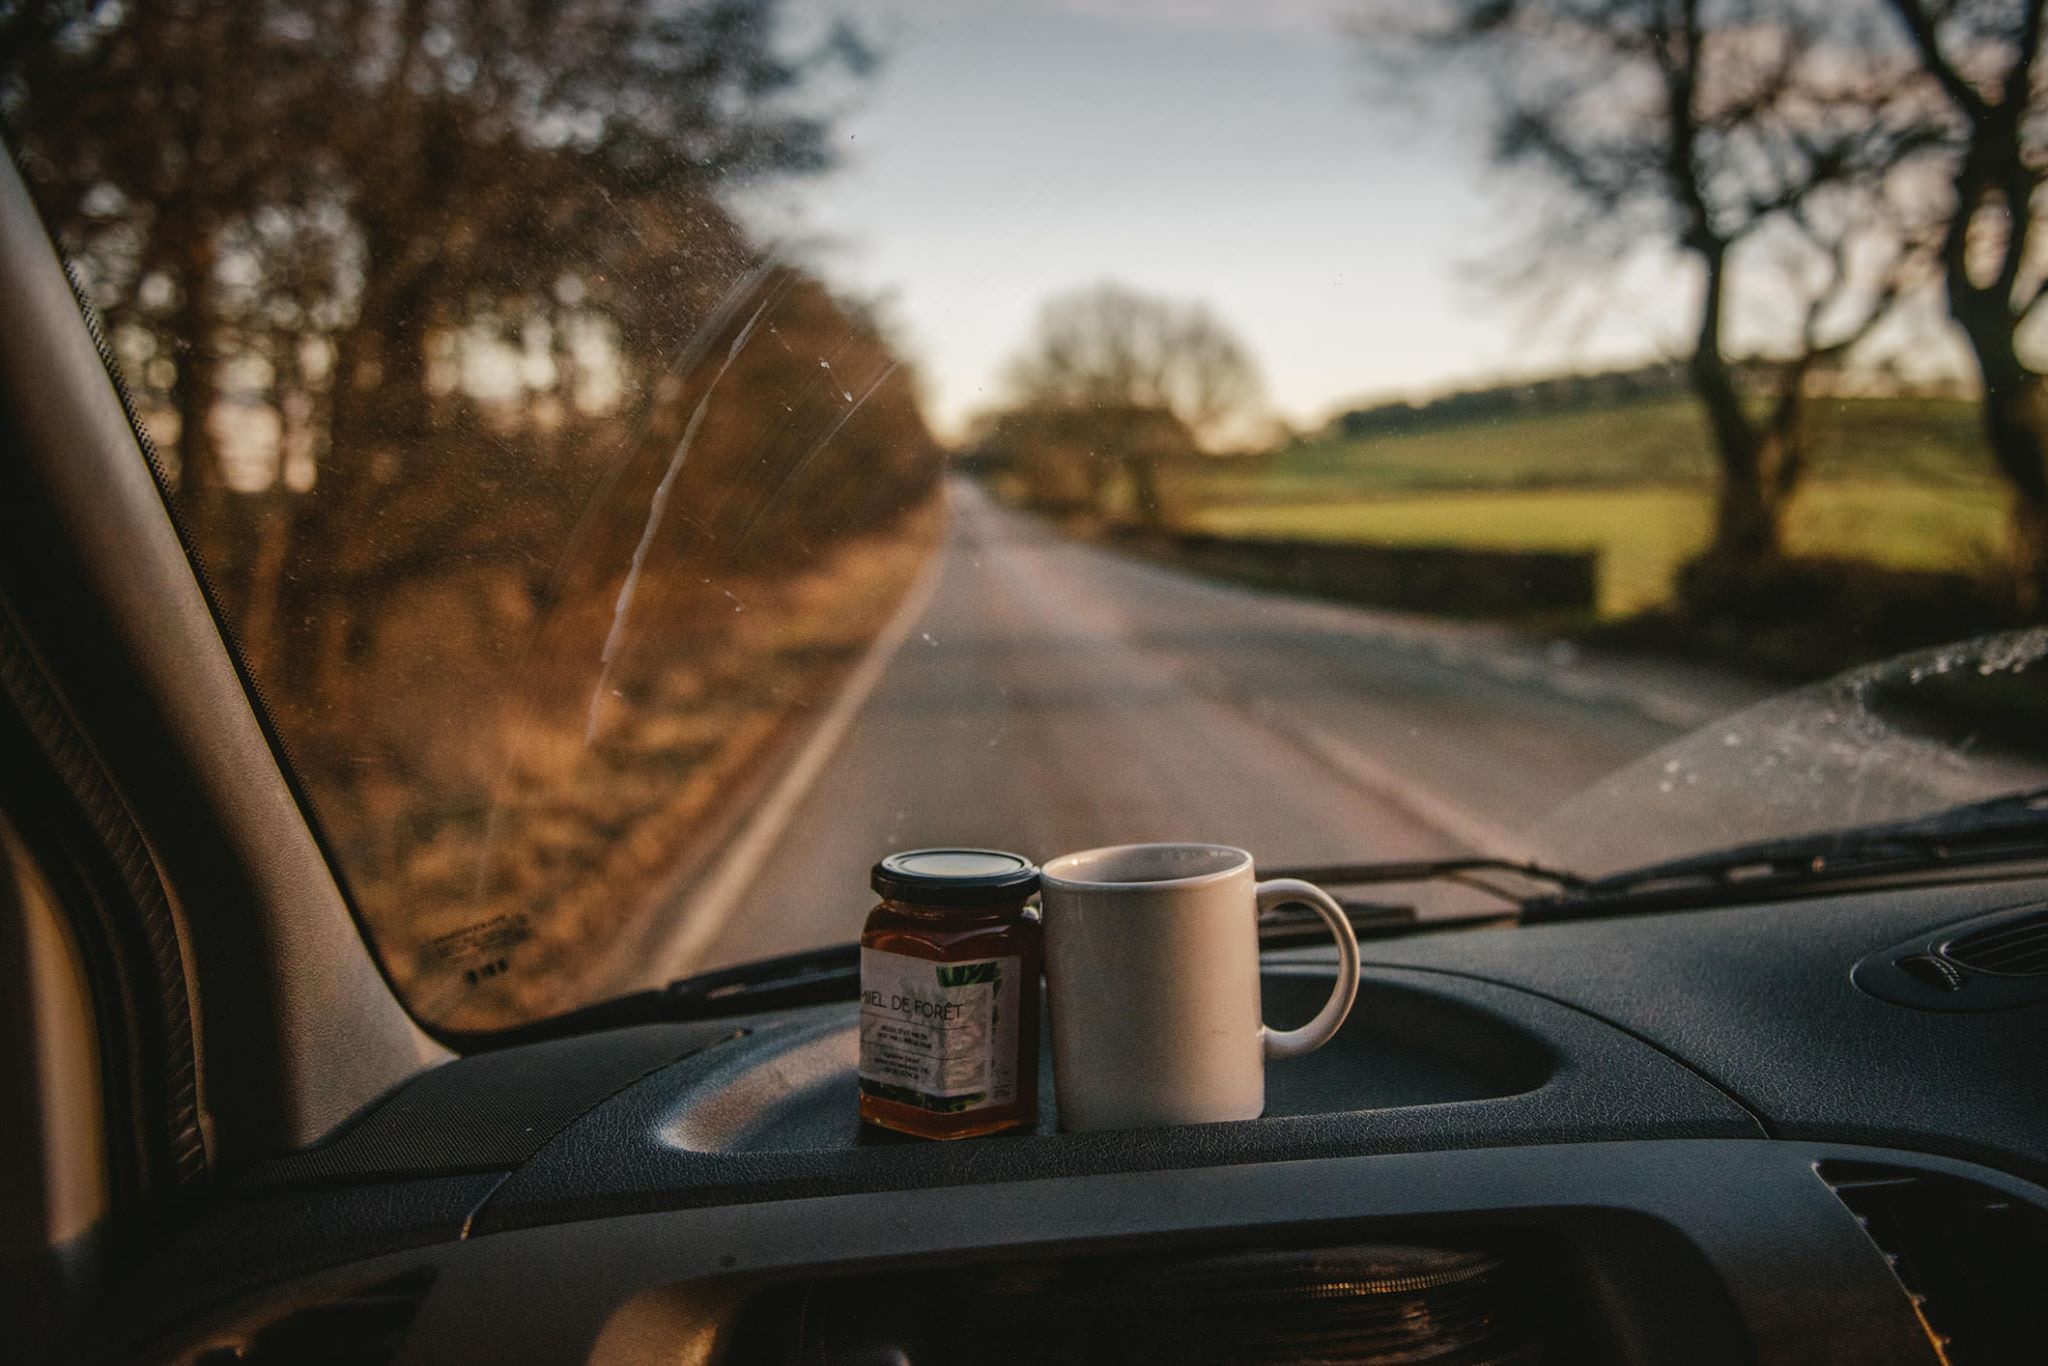 Tea and honey in a campervan on a roadtrip in Ireland